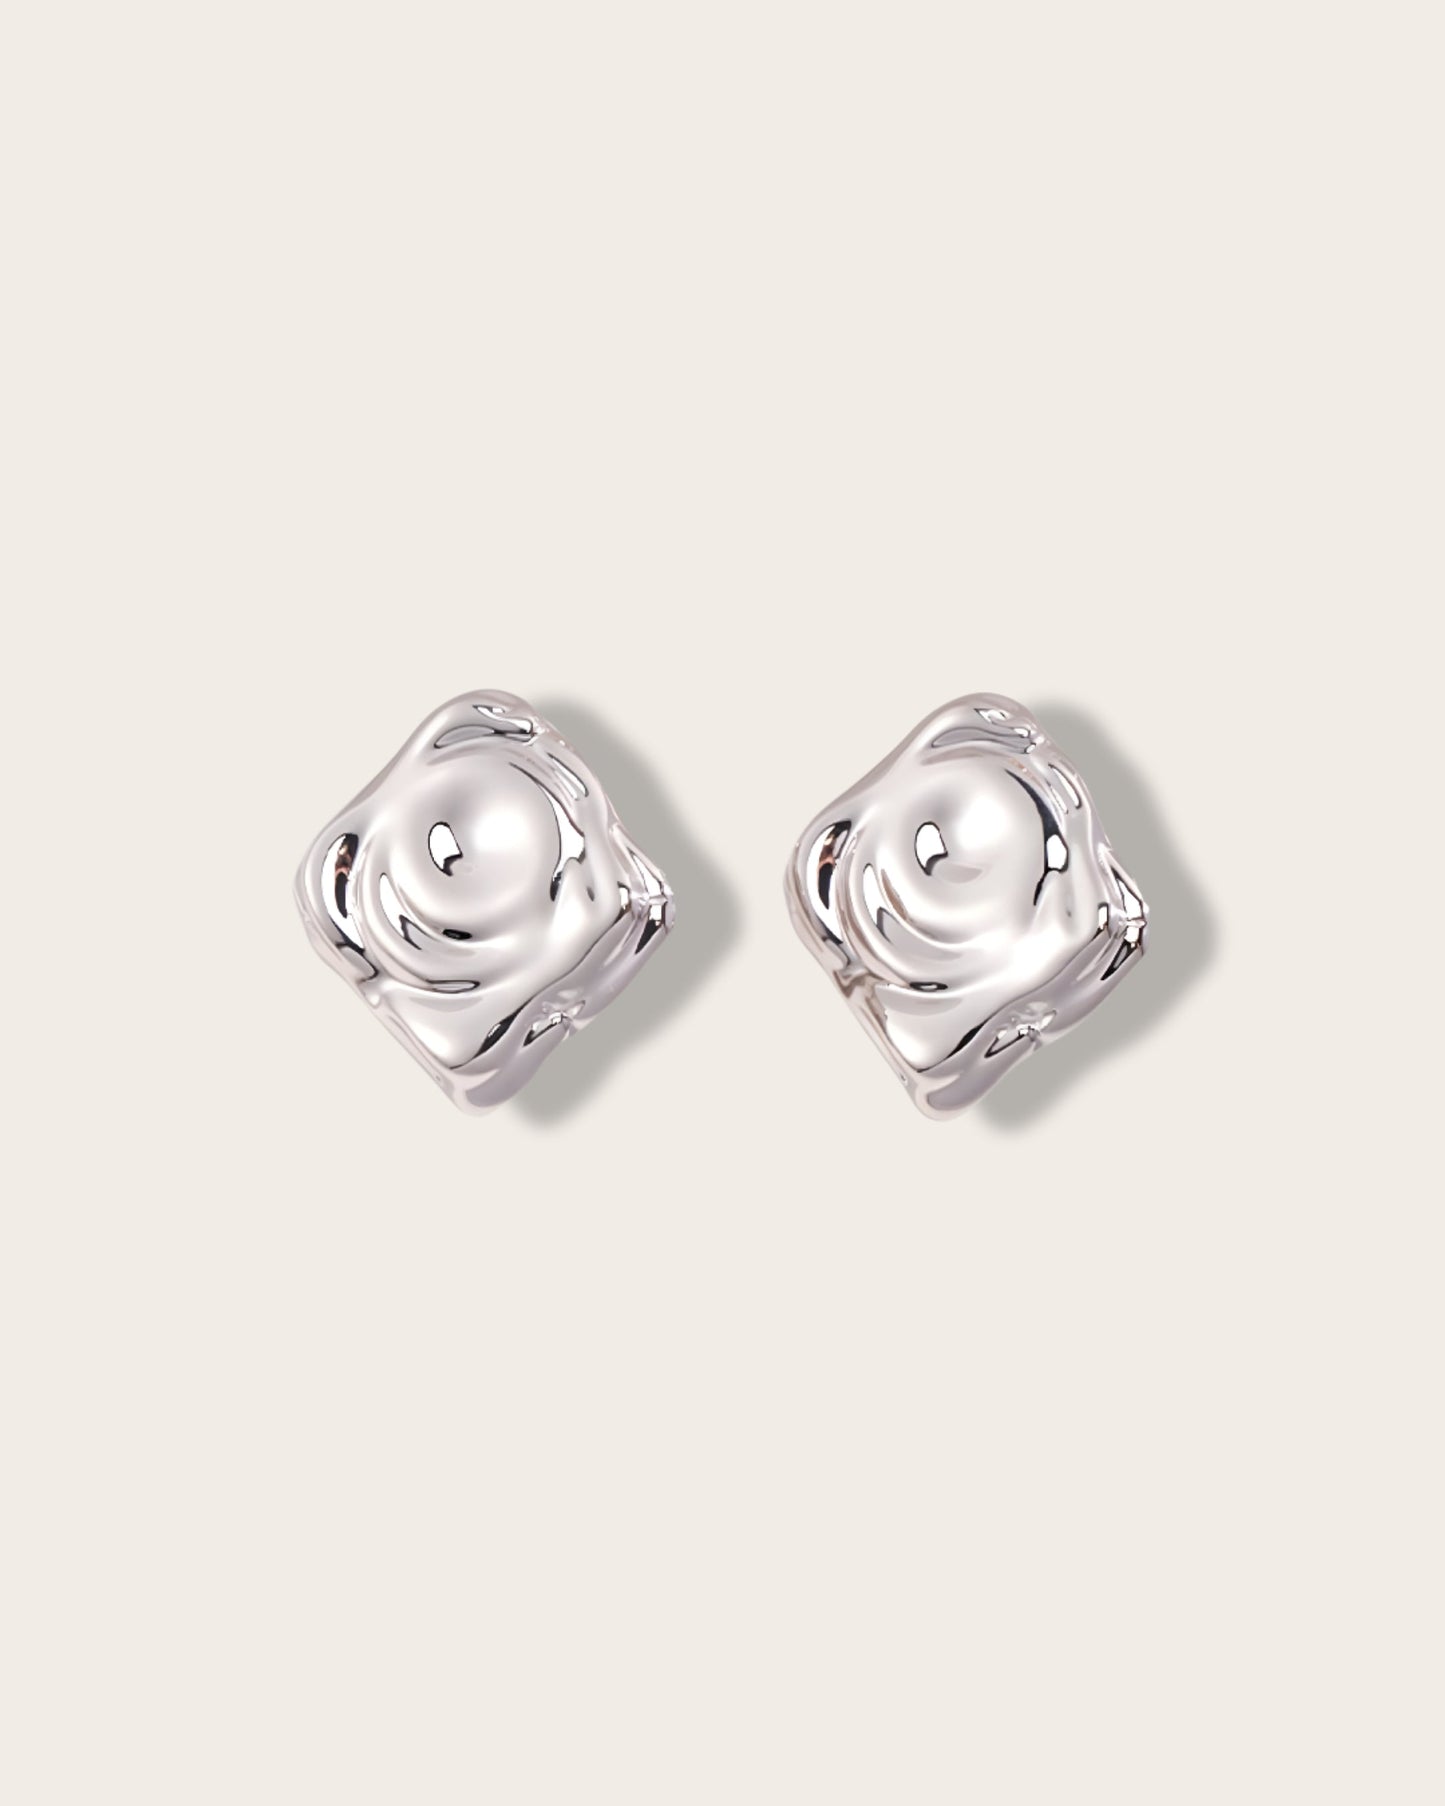 Capture the essence of nature - S925 Sterling Silver with 18K Gold Vermeil Earrings - create enchanting ripples - graceful movement of droplets